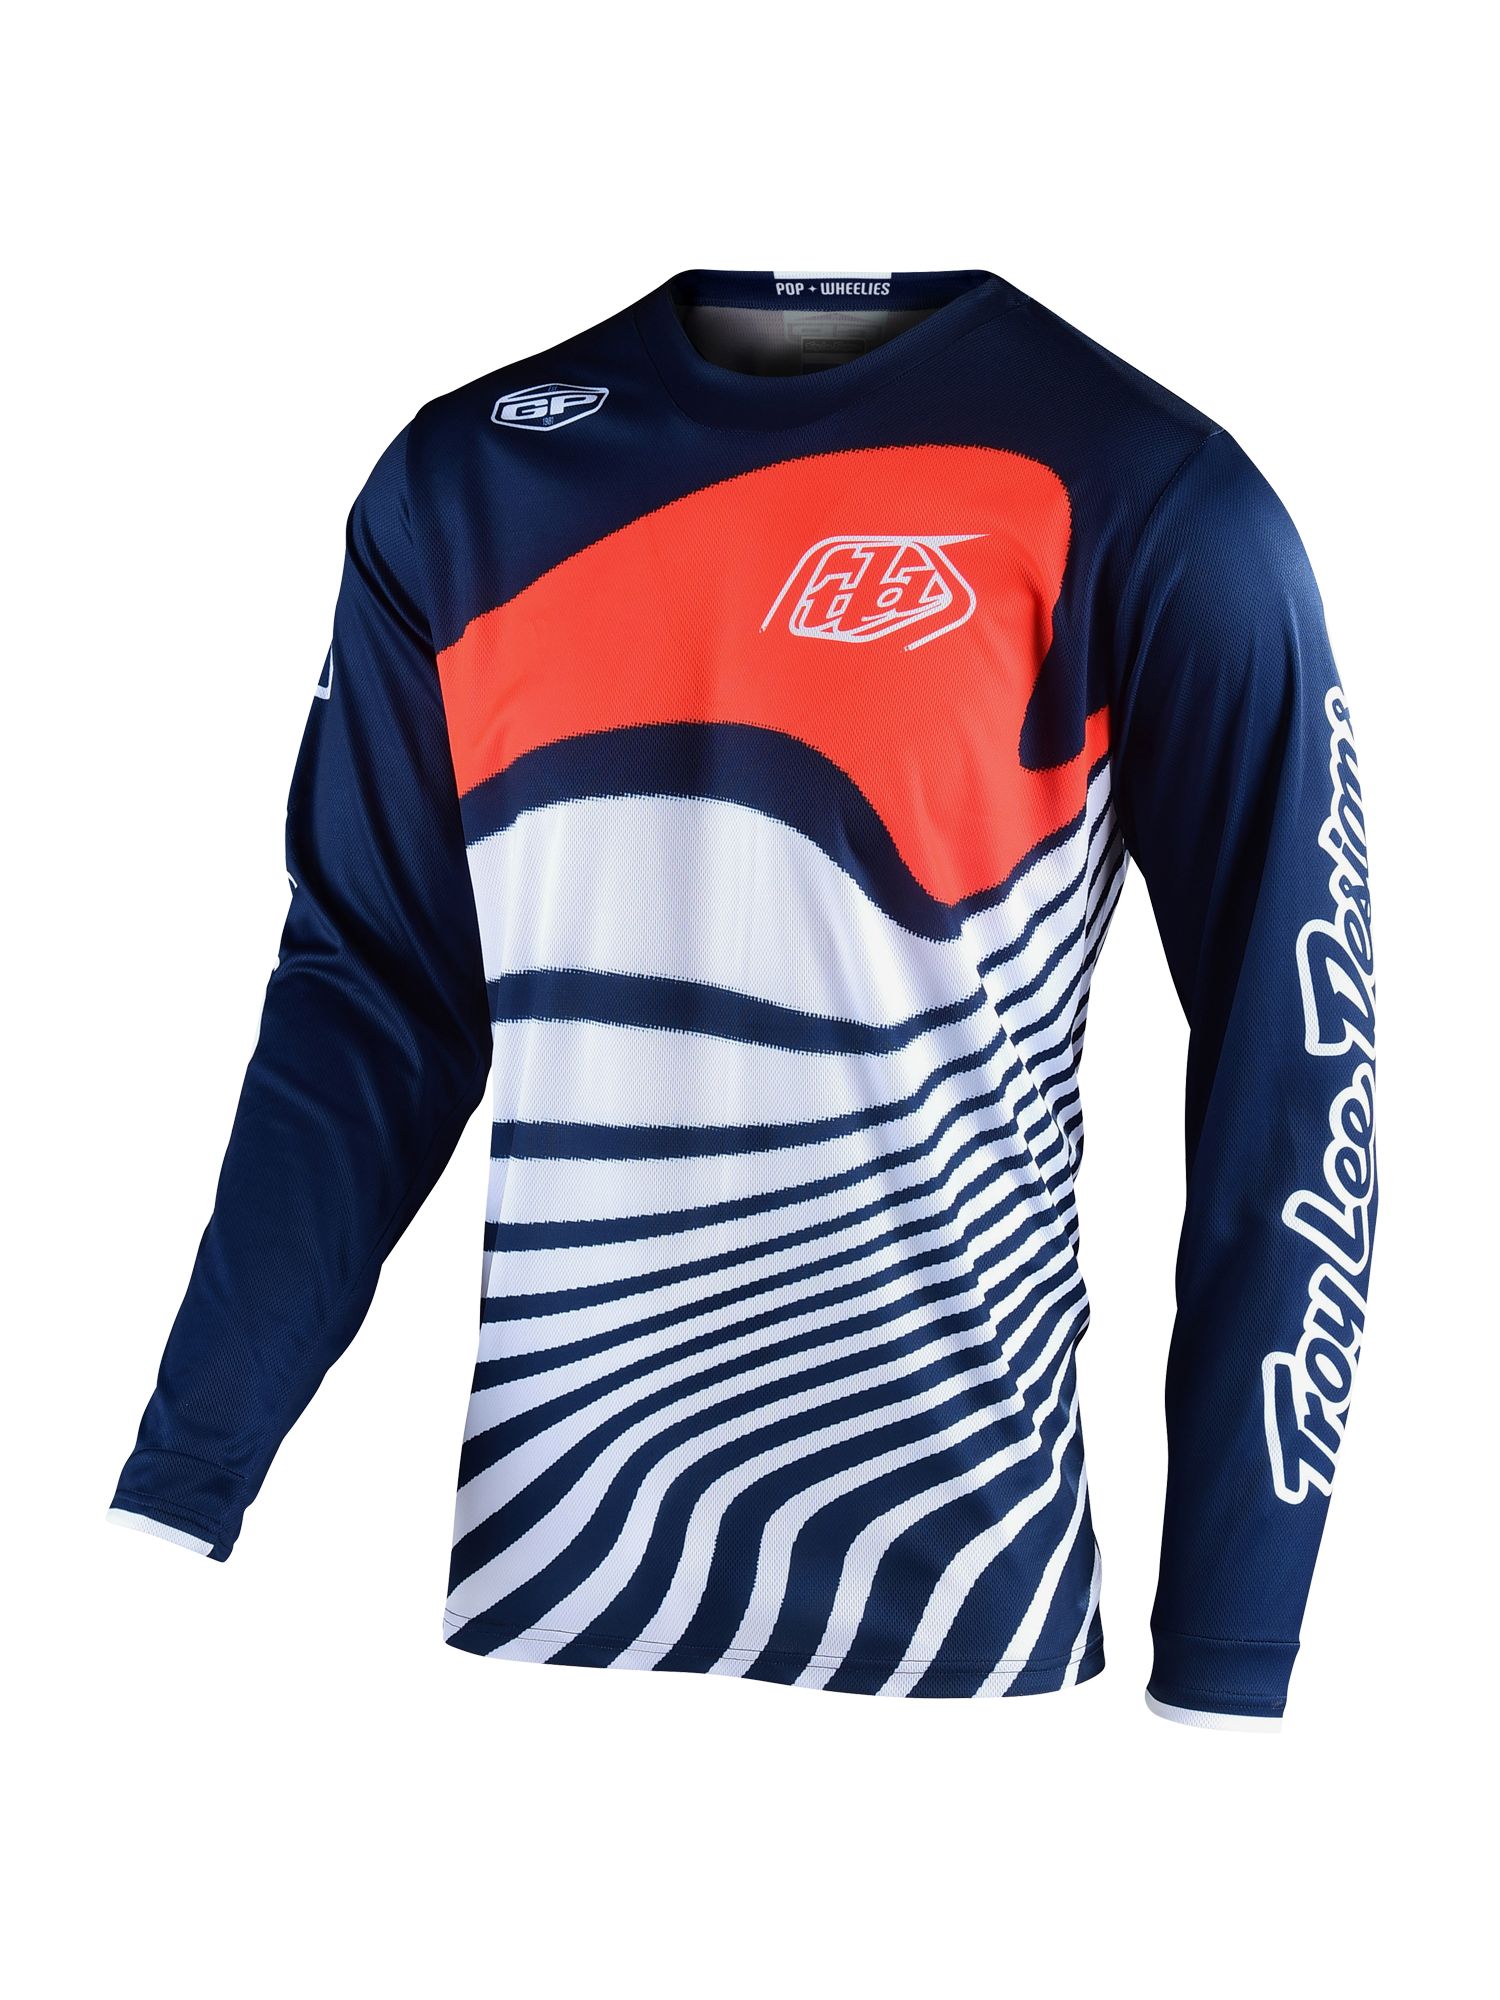 TDU227｜YOUTH GP JERSEY［1colors］